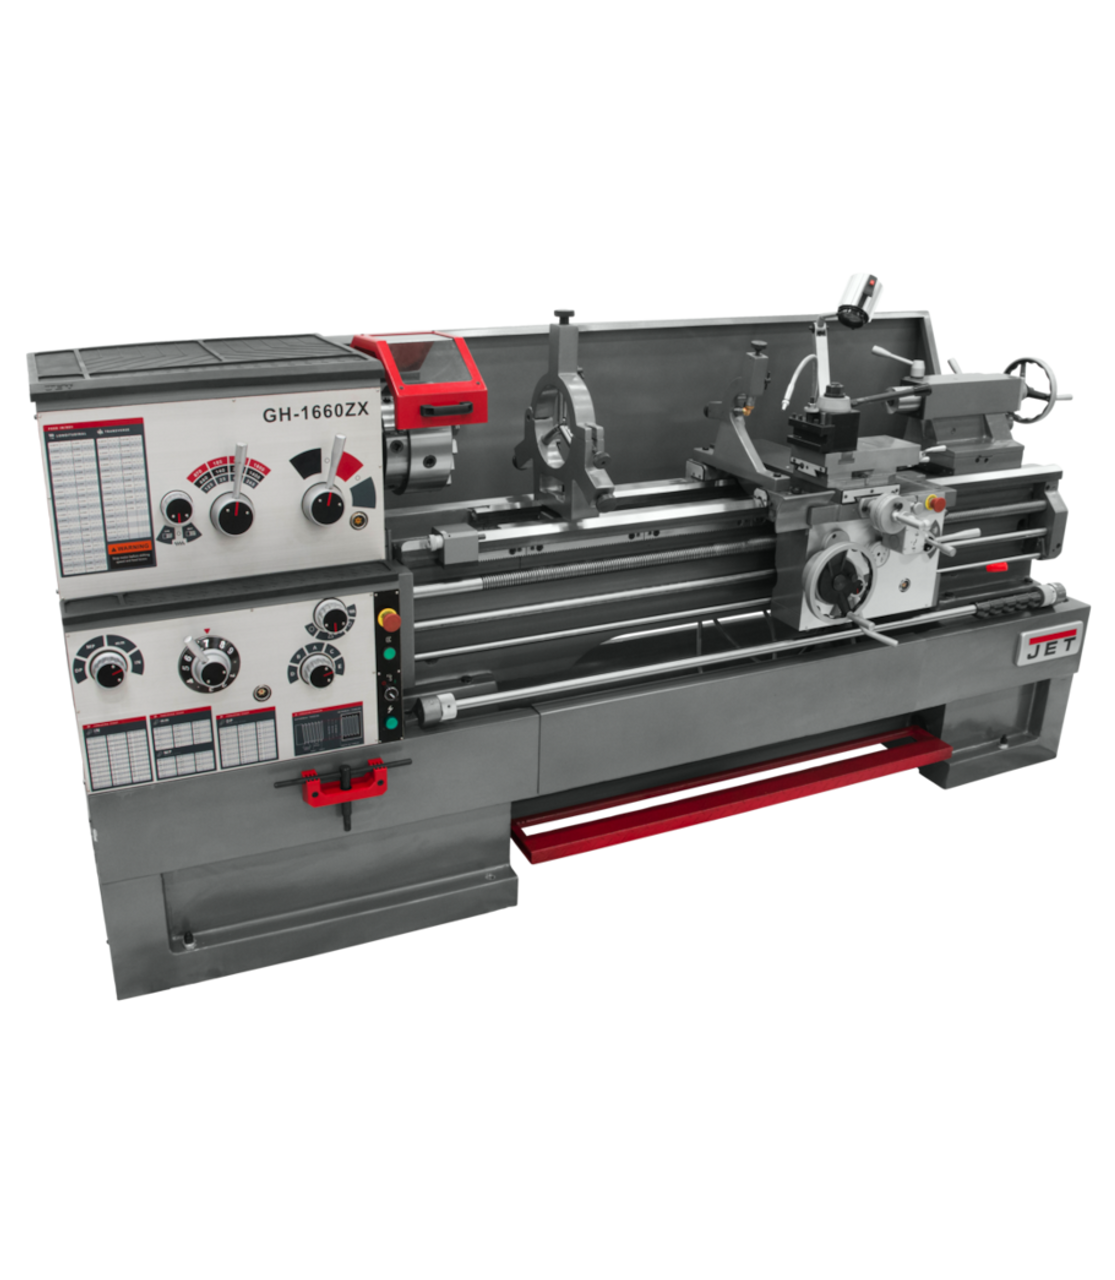 JET GH-1660ZX Large Spindle Bore Lathe with ACU-RITE 203 DRO with Taper Attachment 460V